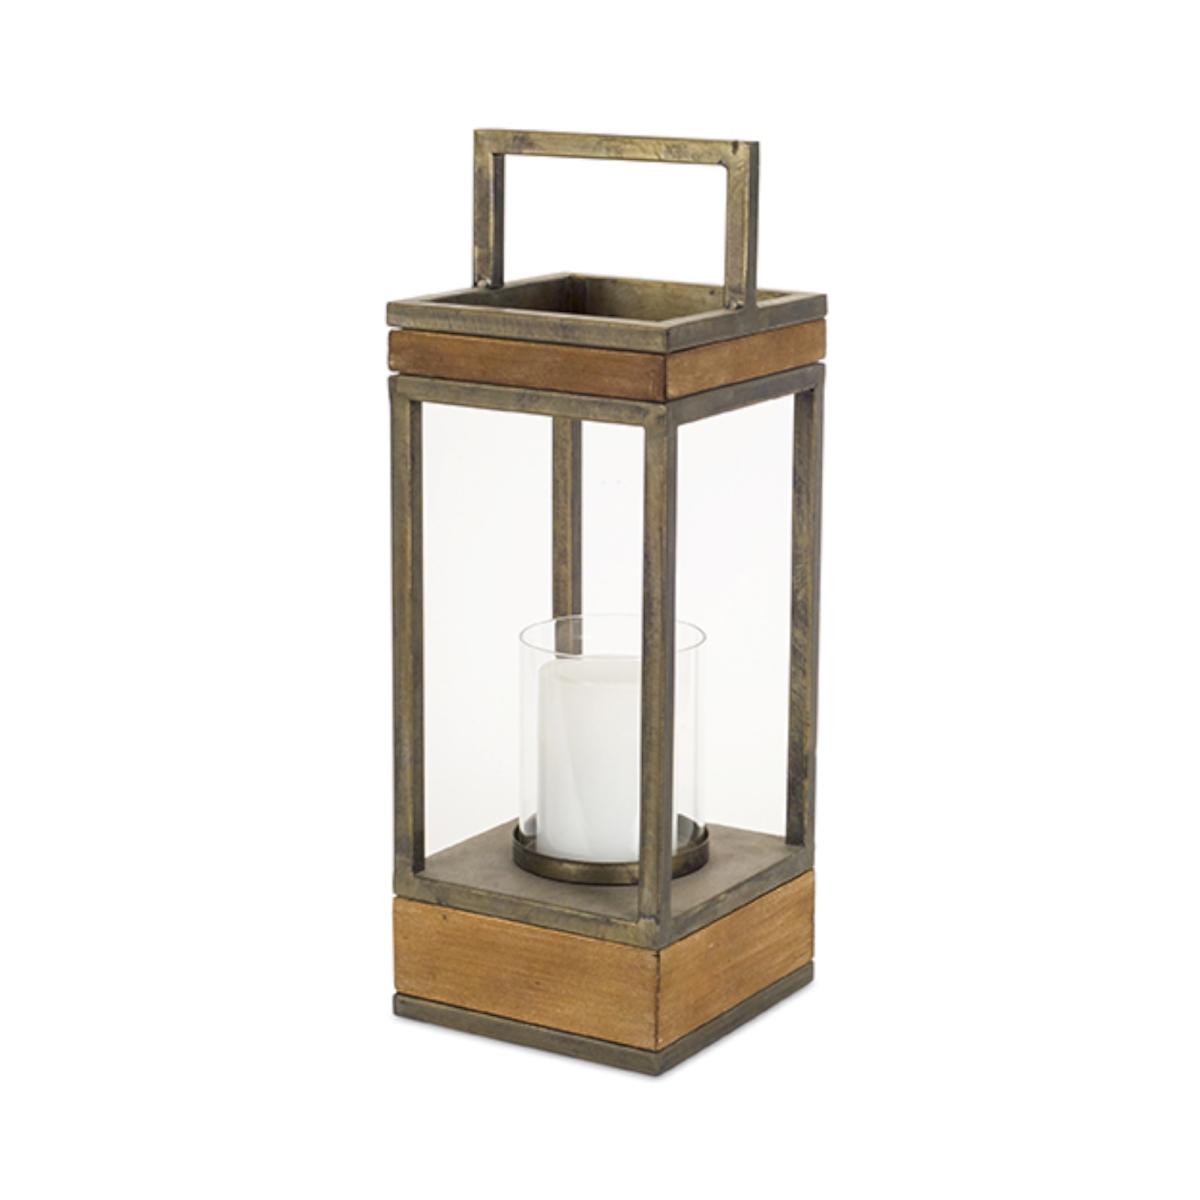 UPC 746427725101 product image for 72510DS 19.25 x 6.5 in. Lantern, Metal & Wood - Brown & Copper | upcitemdb.com